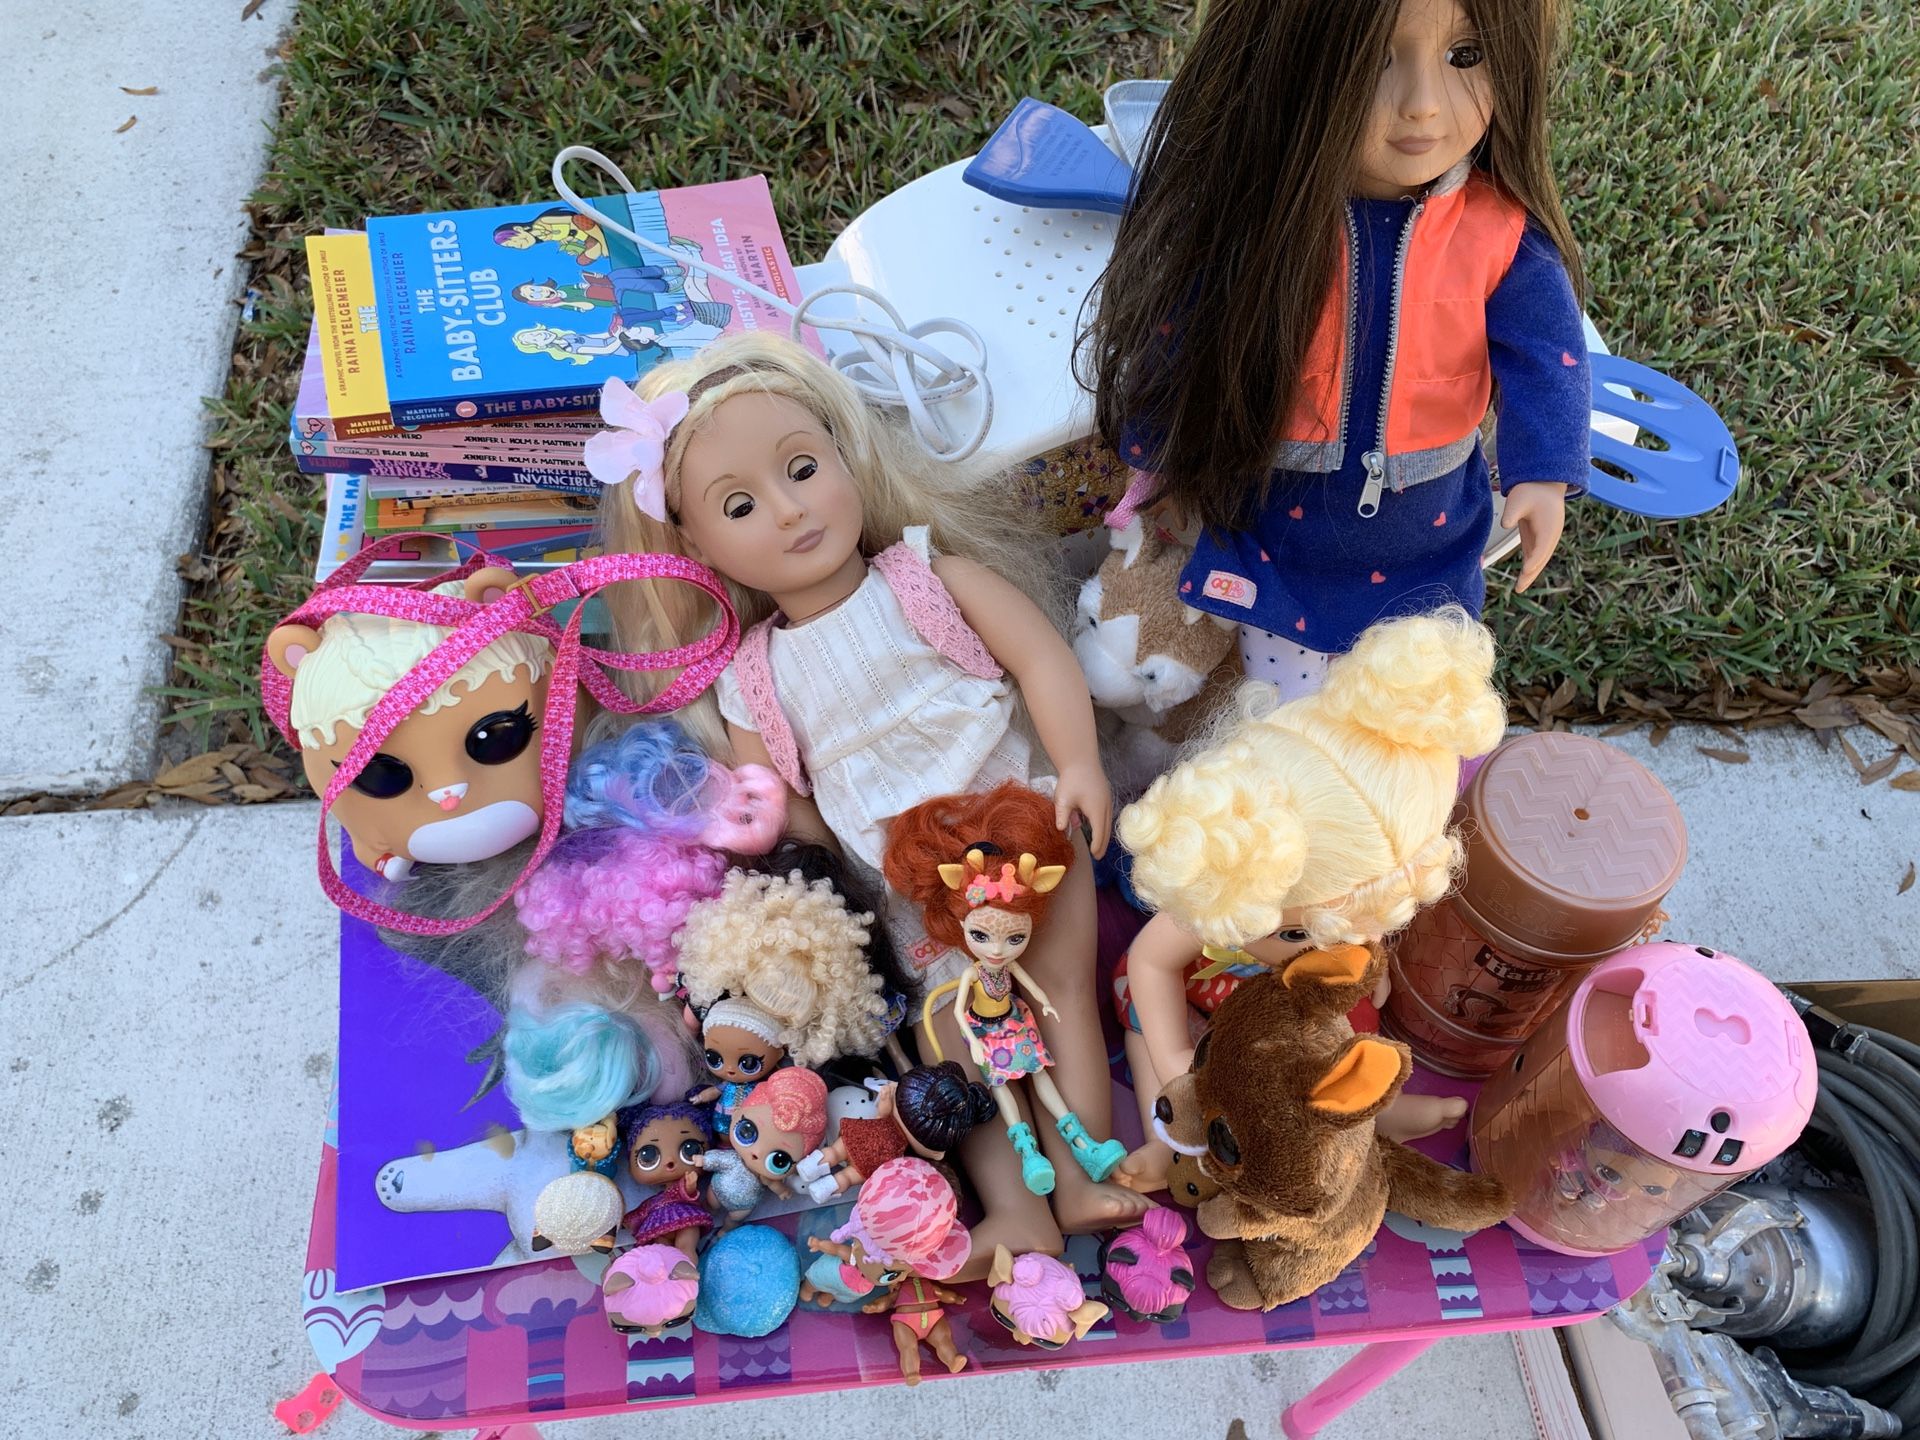 Lol dolls, toys and books